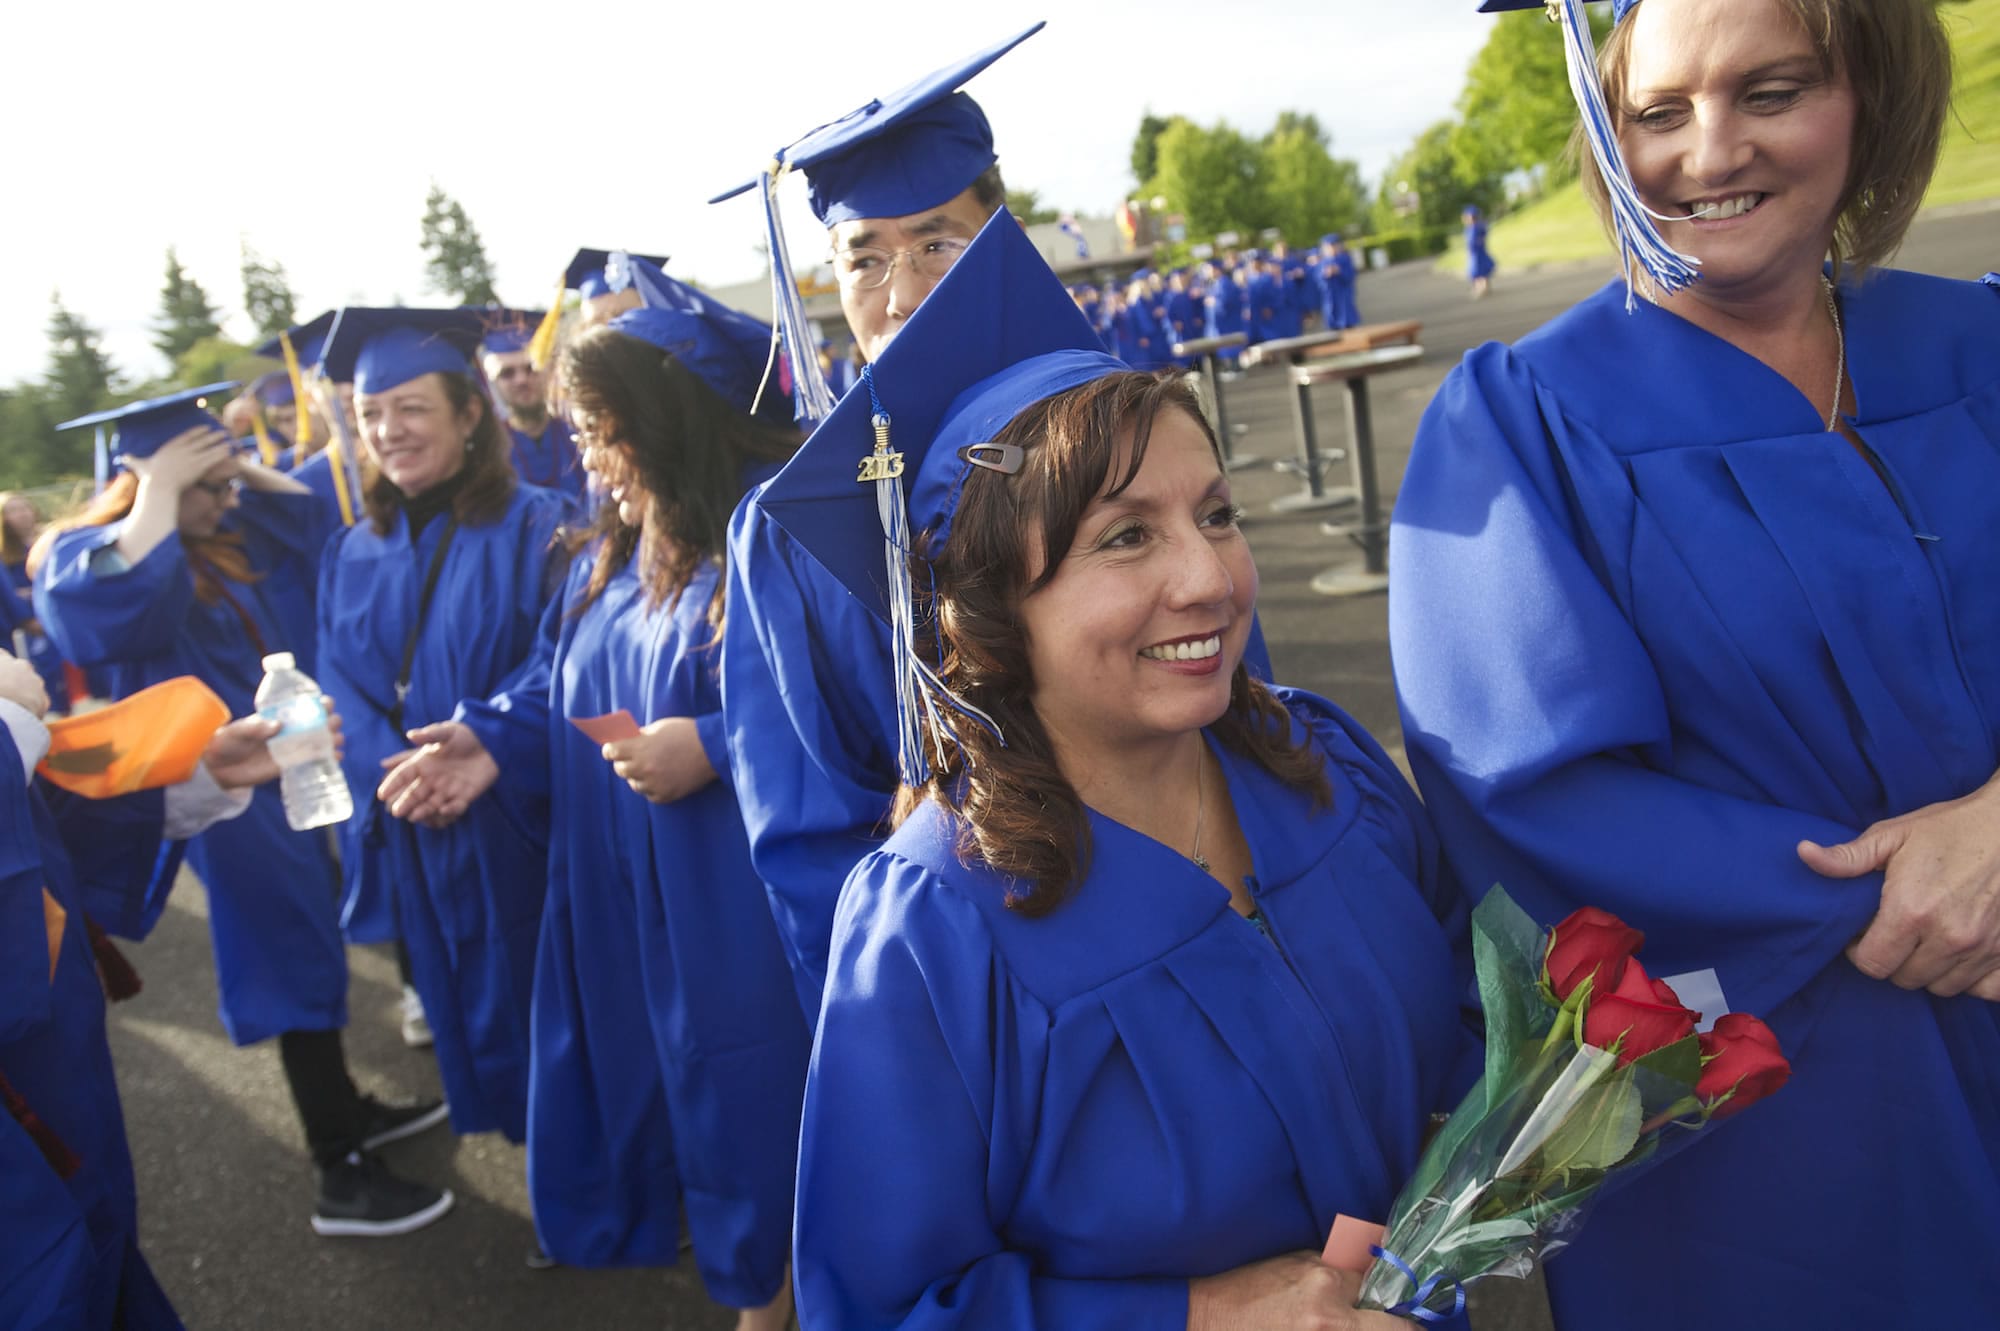 Catherine Mosley, 51, from Vancouver, said she graduated from Clark College to inspire her eight grandchildren.